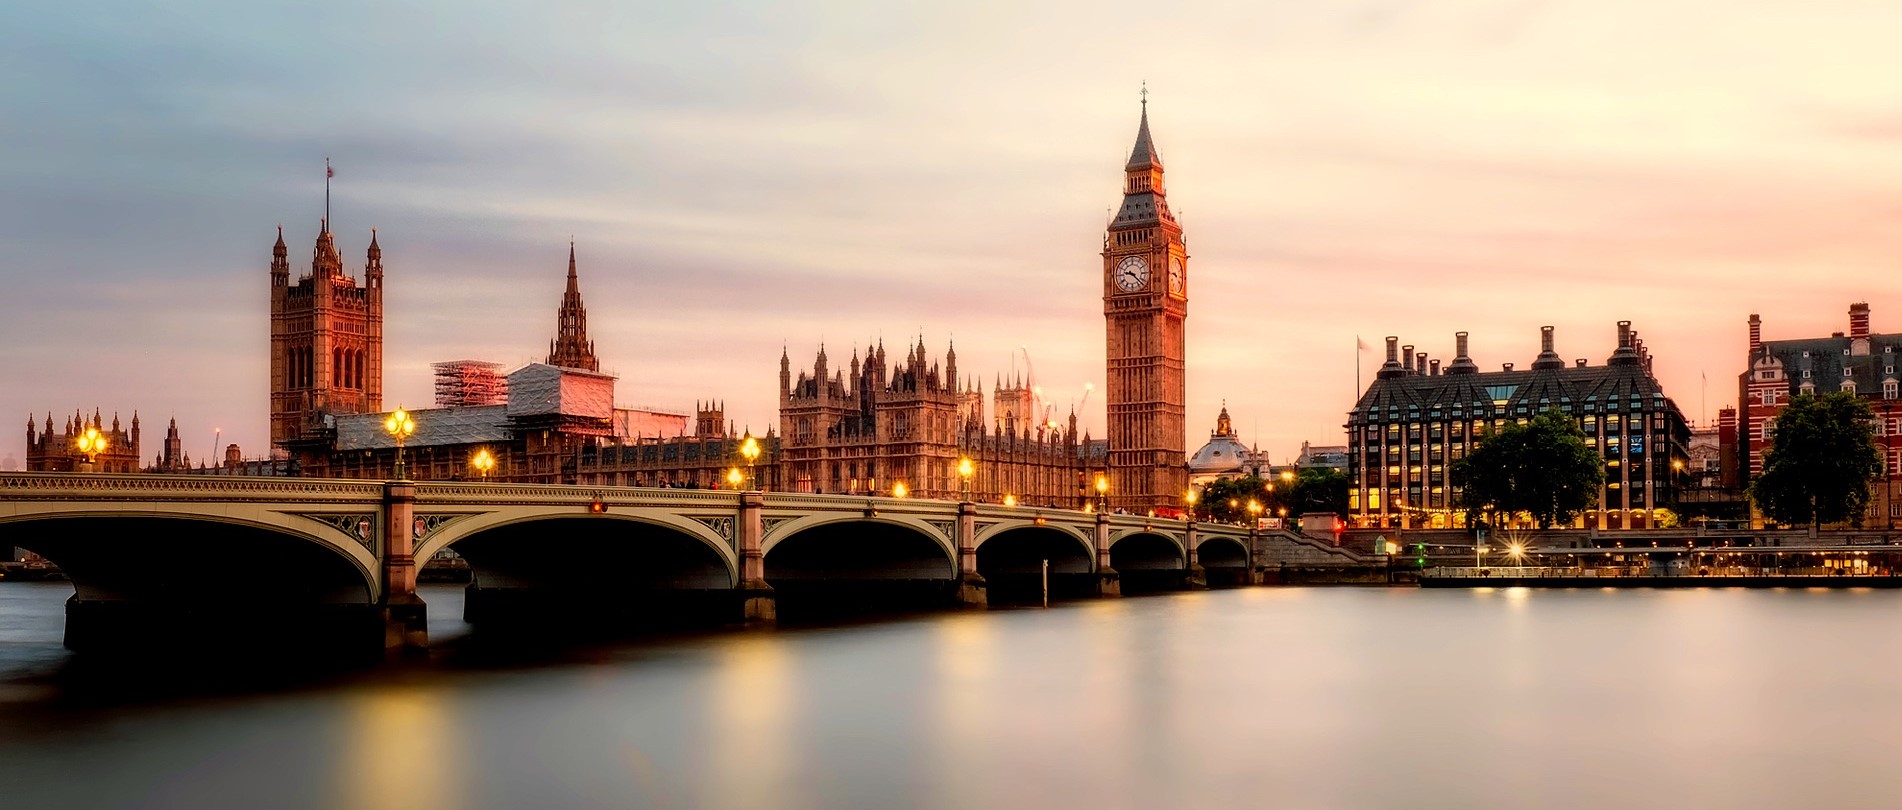 Microsoft Ignite came to London for two days of tech inspiration. Credit: Pixabay